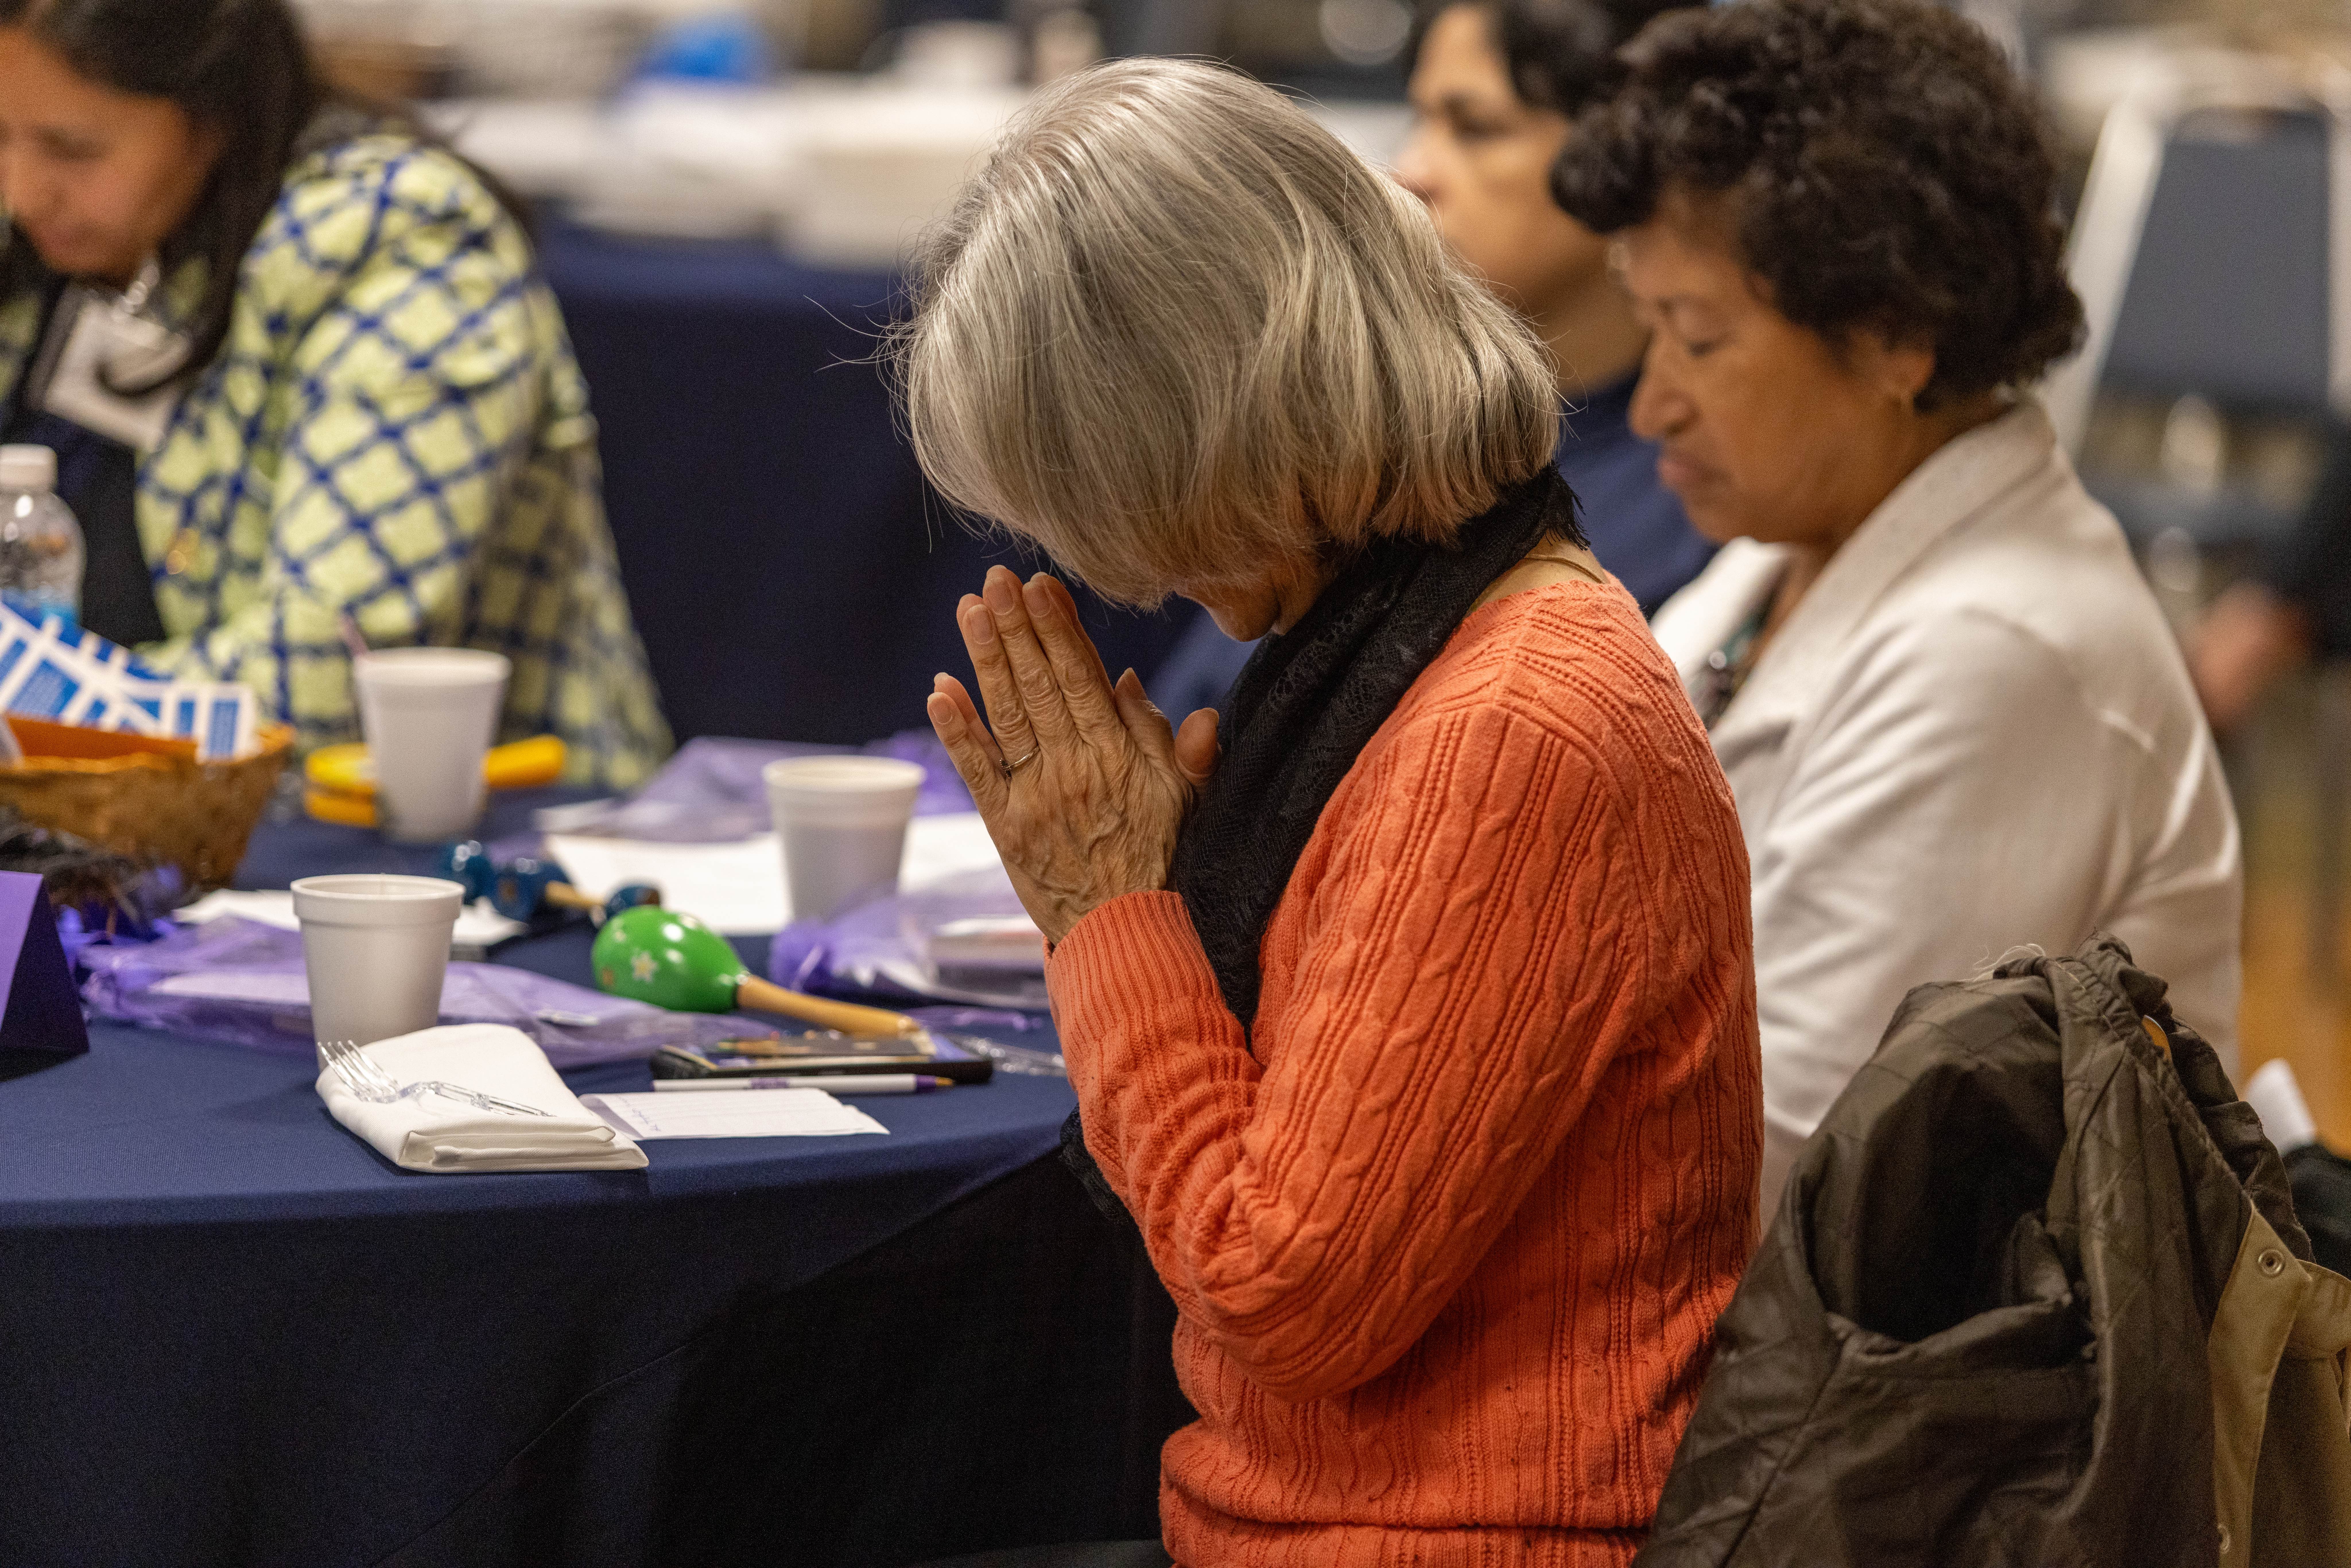 Women pray at the 35th anniversary breakfast for the St. Petersburg chapter of Magnificat.